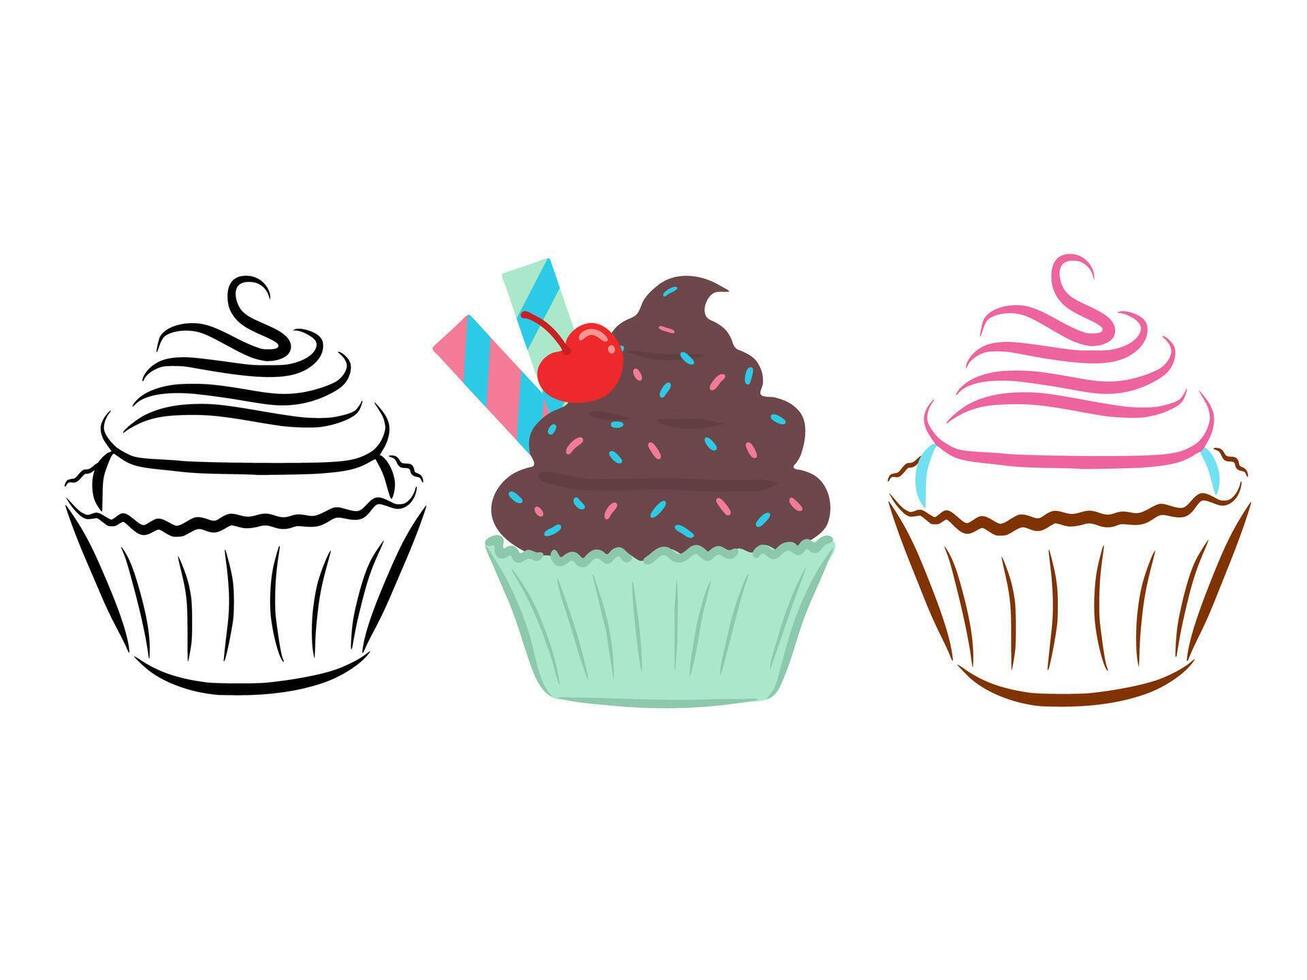 Cute cupcakes clipart with candy sprinkles and red cherry on top. Cake muffins cartoon with colorful cream frosting and outline vector image